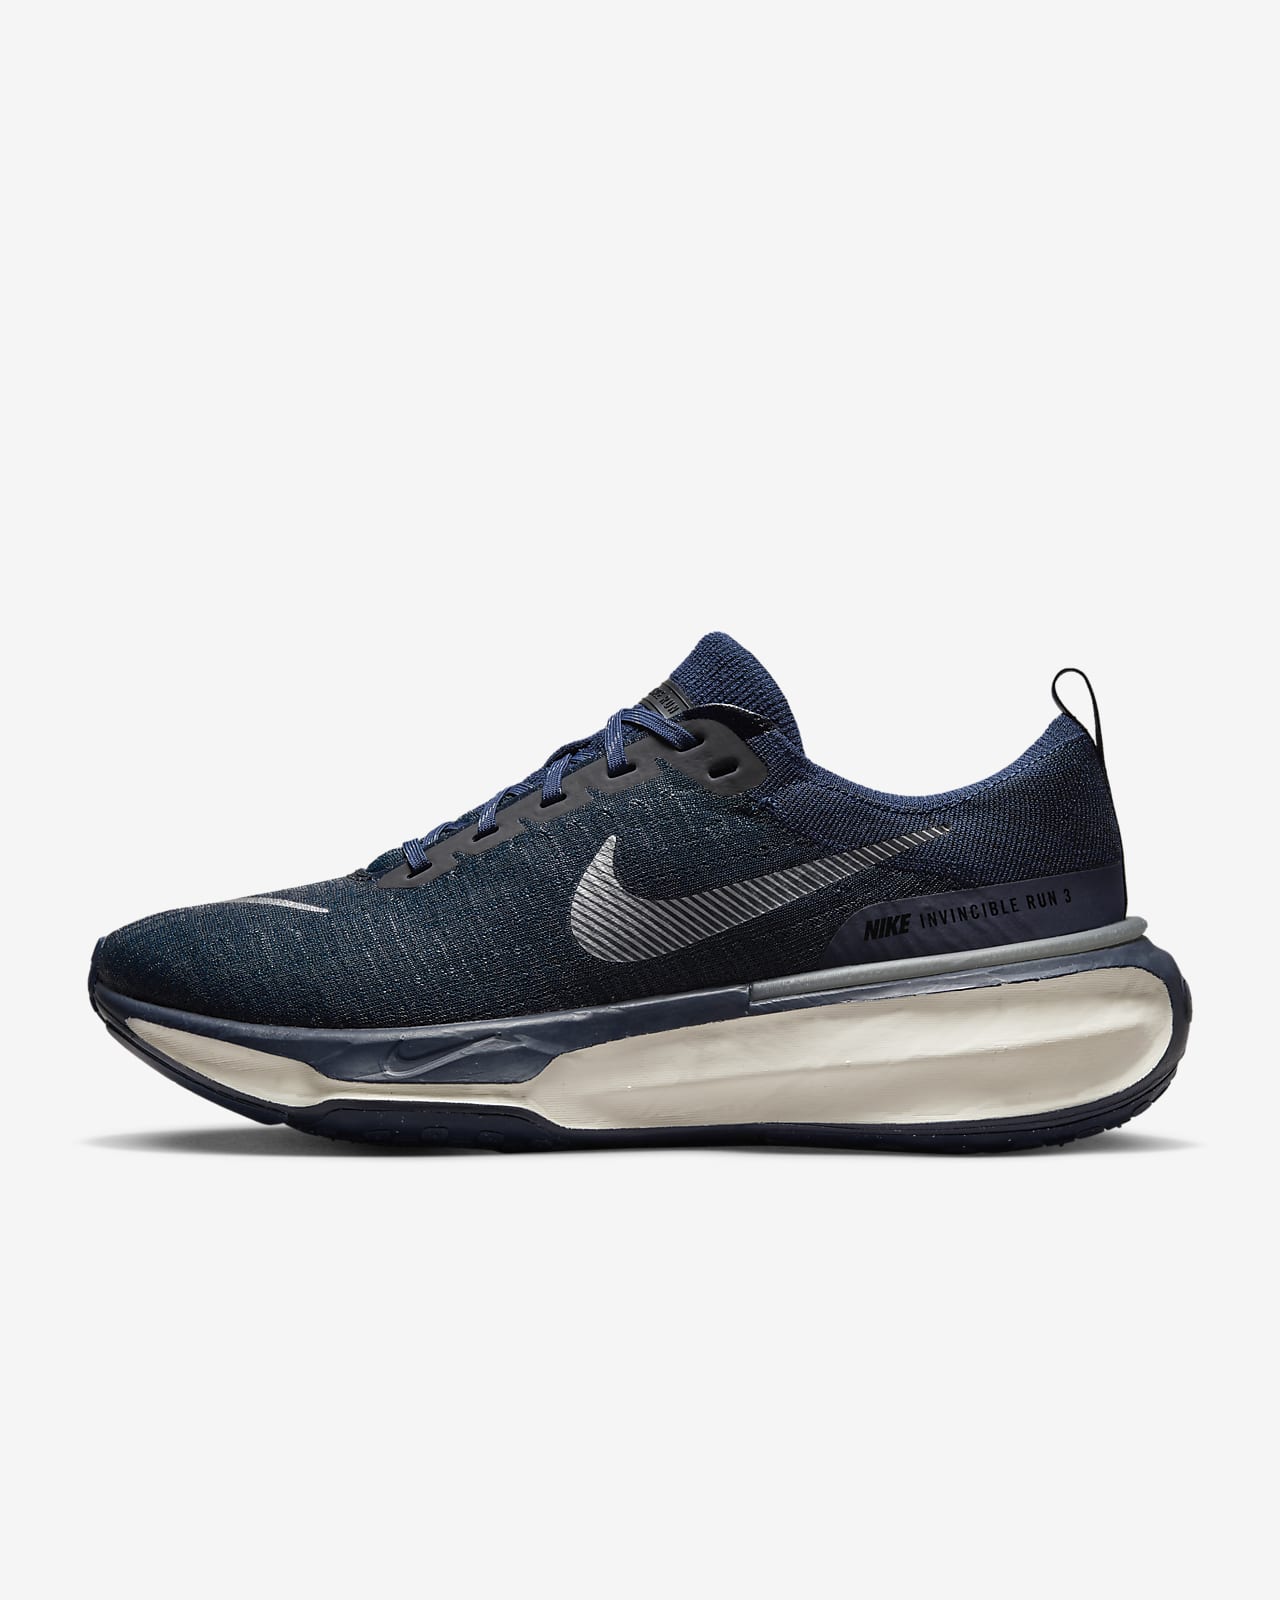 Accessoires Homme - Nike Running - Accessoires